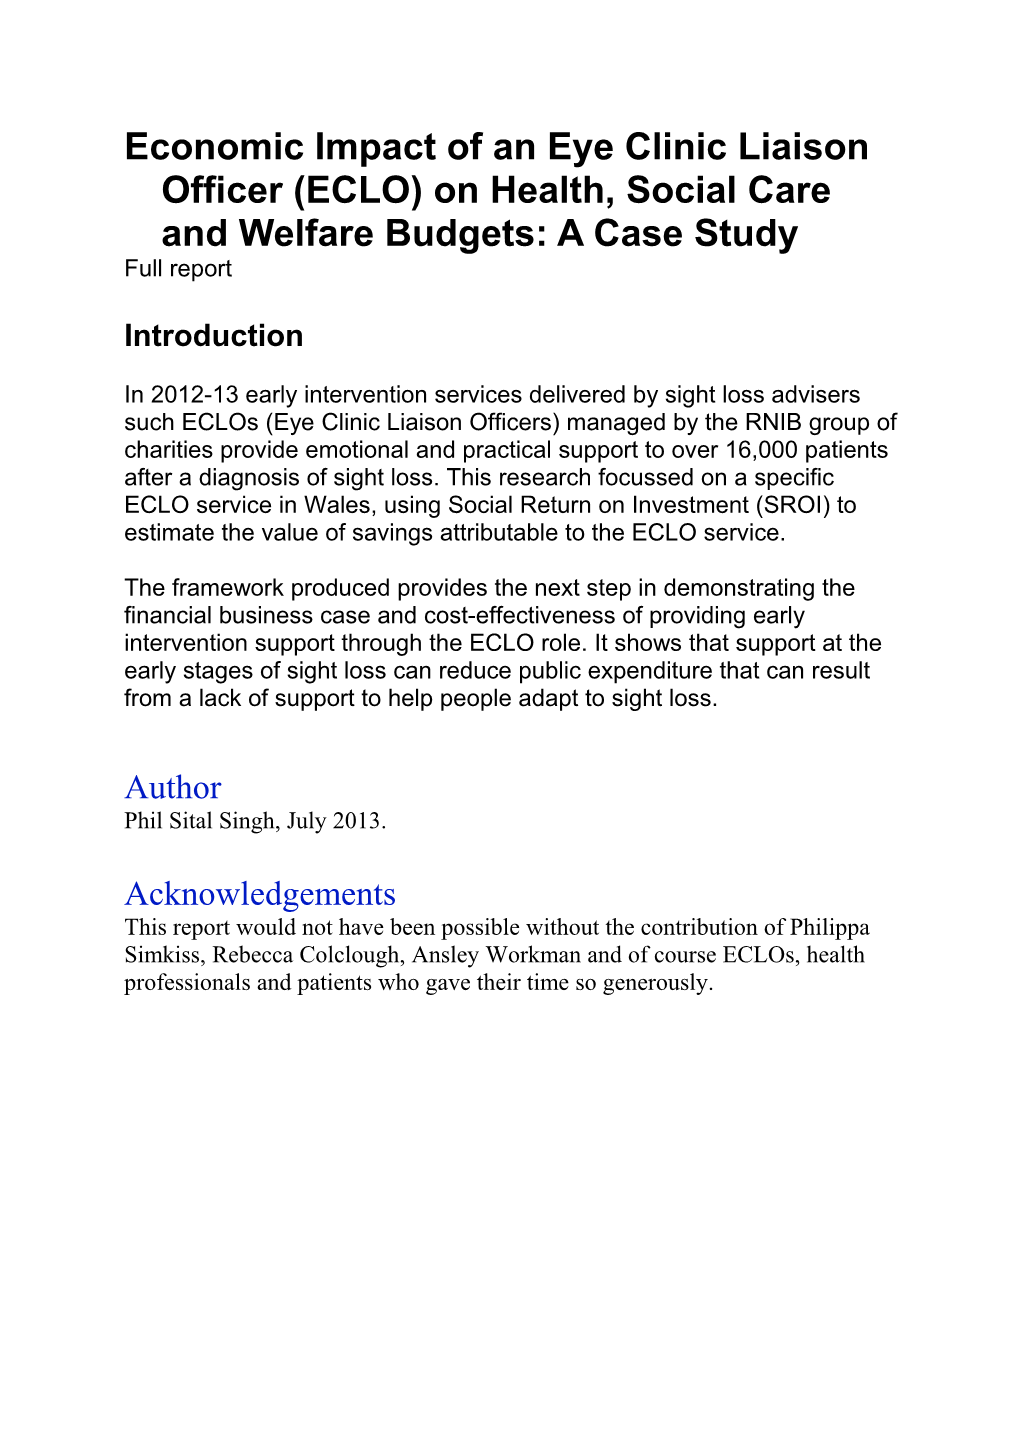 Economic Impact of an Eye Clinic Liaison Officer (ECLO) on Health, Social Care and Welfare